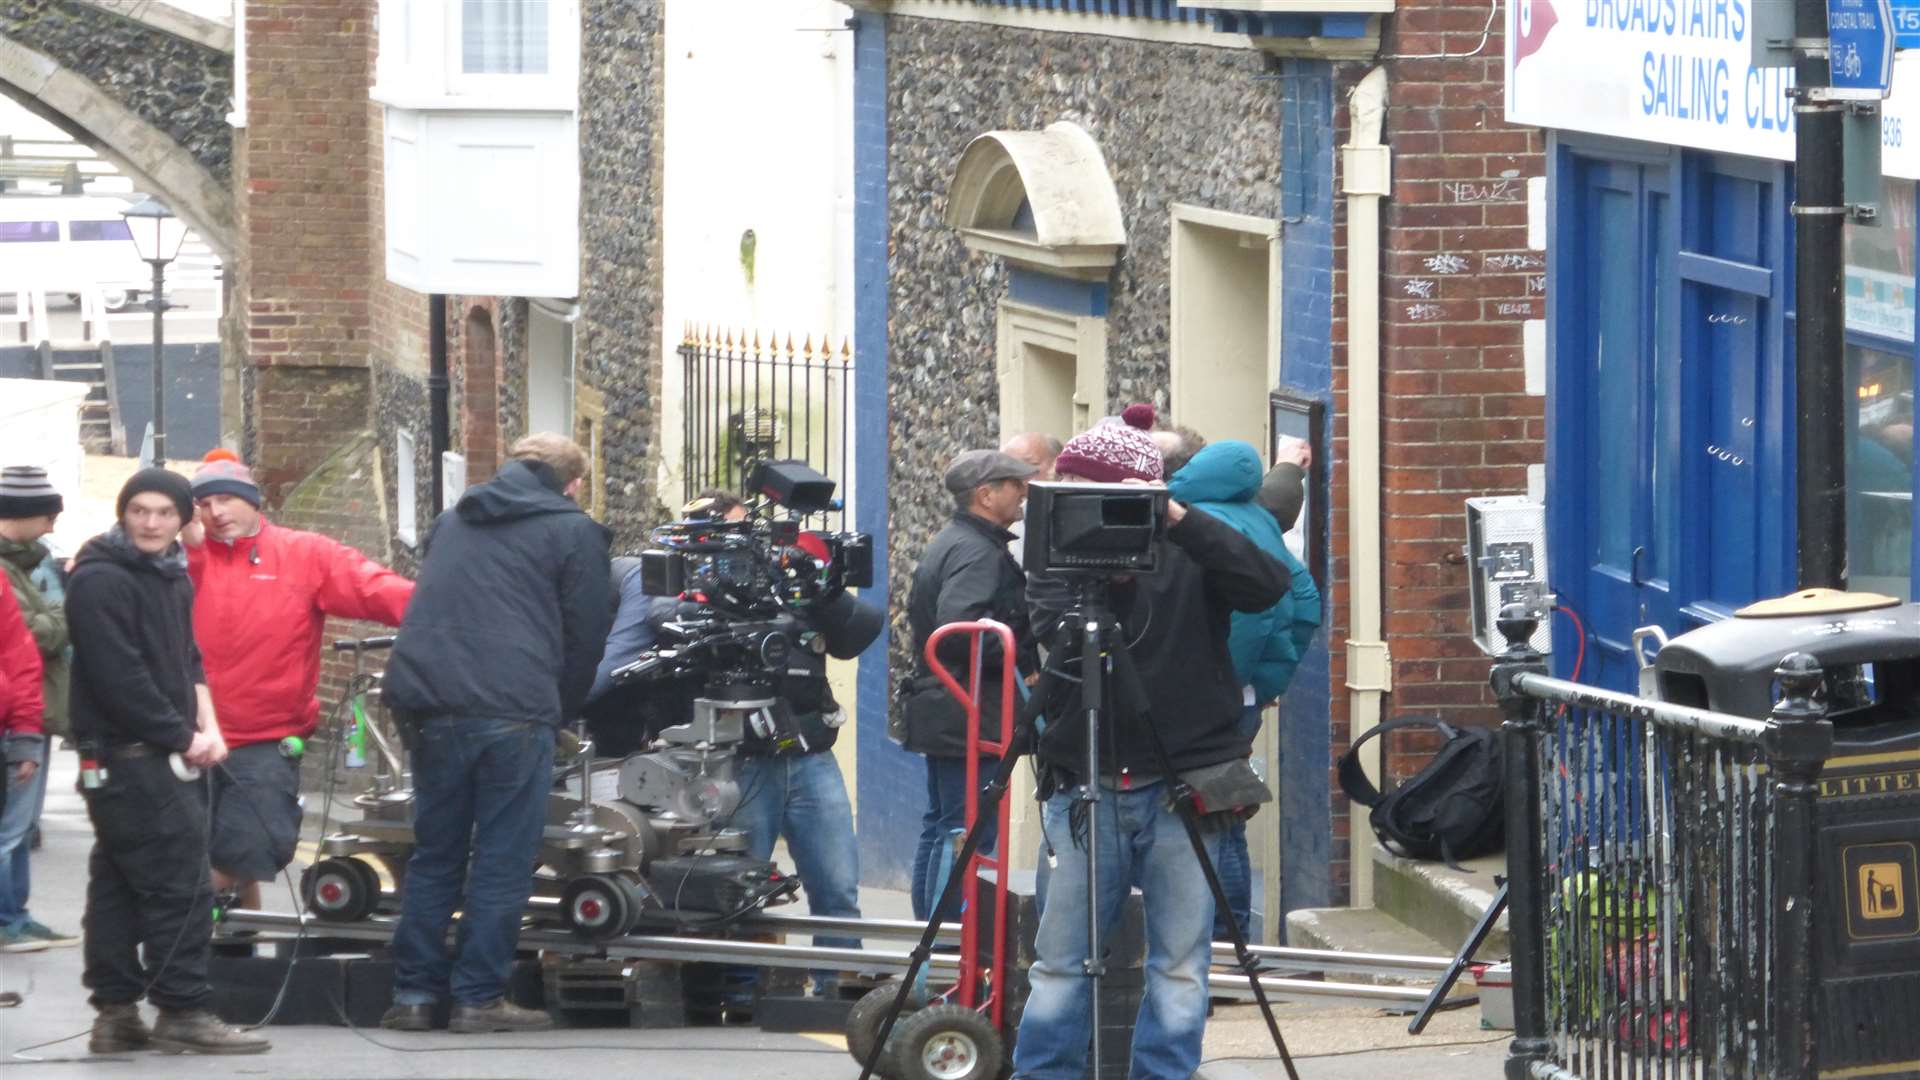 Filming for The Lady in the Van took place on Harbour Street, Broadstairs. Credit: Thanet District Council